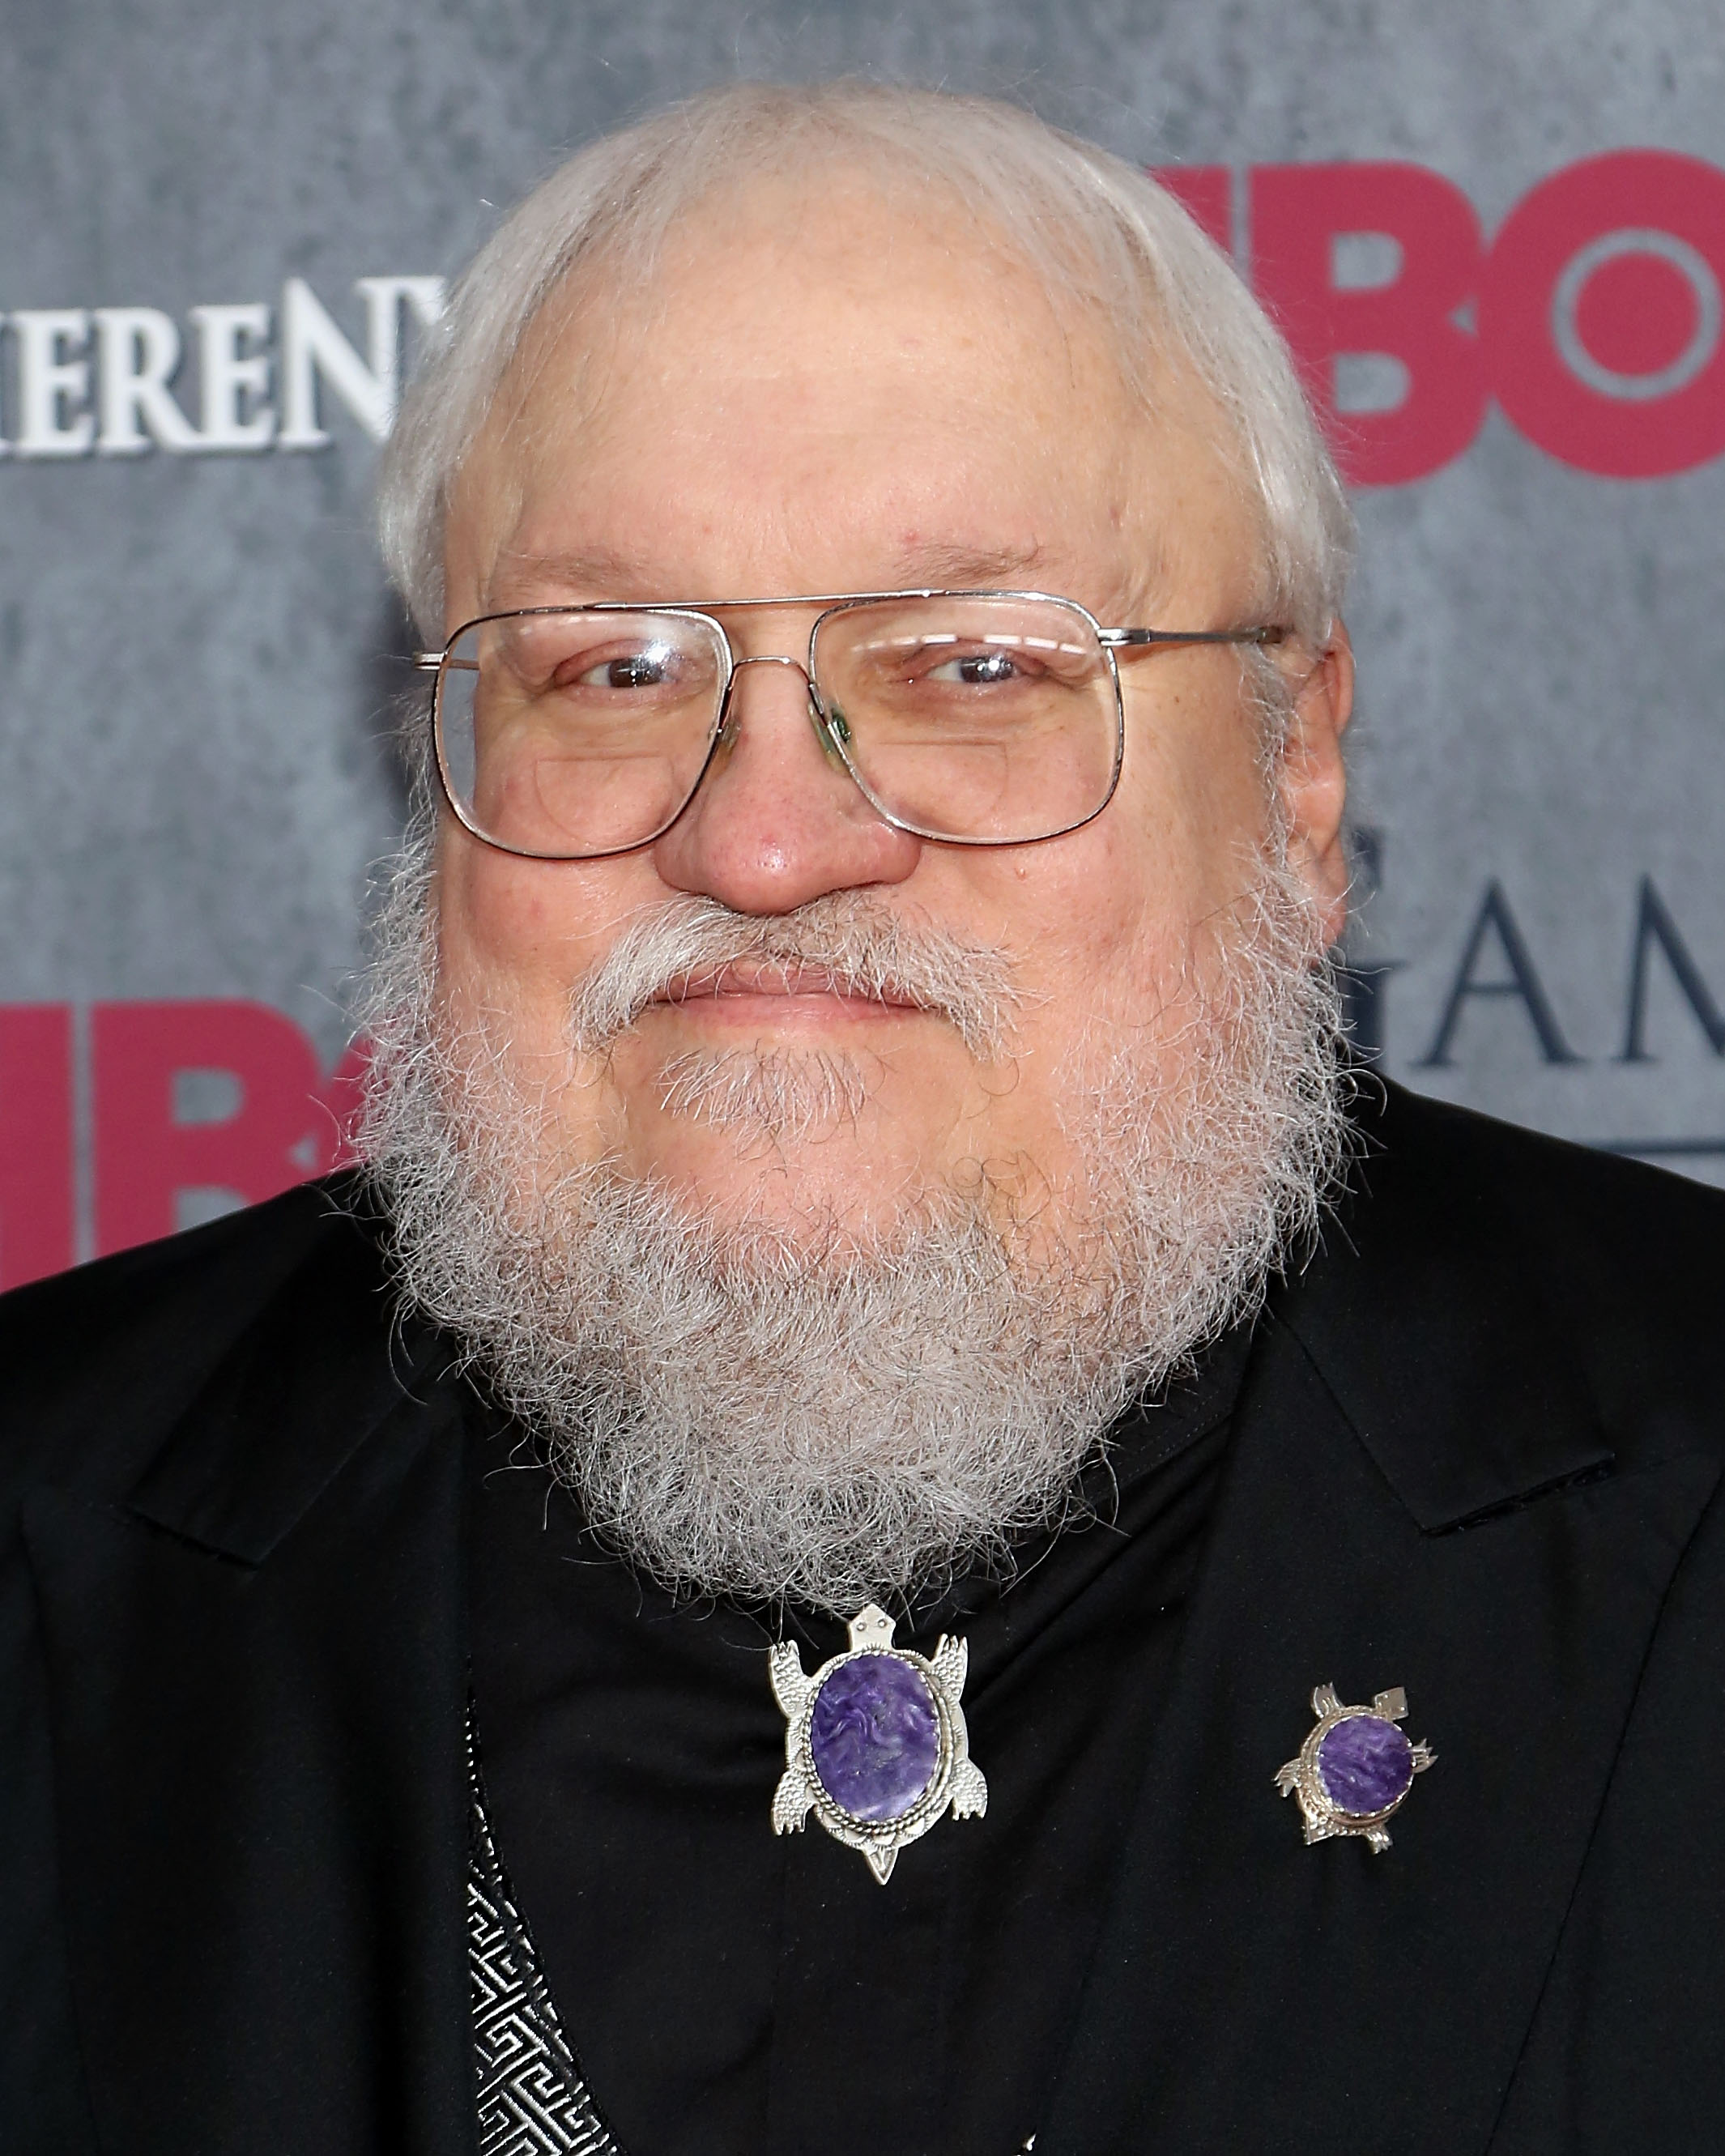 Series creator George R.R. Martin attends the "Game Of Thrones" Season 4 premiere (Taylor Hill—FilmMagic/Getty Images)